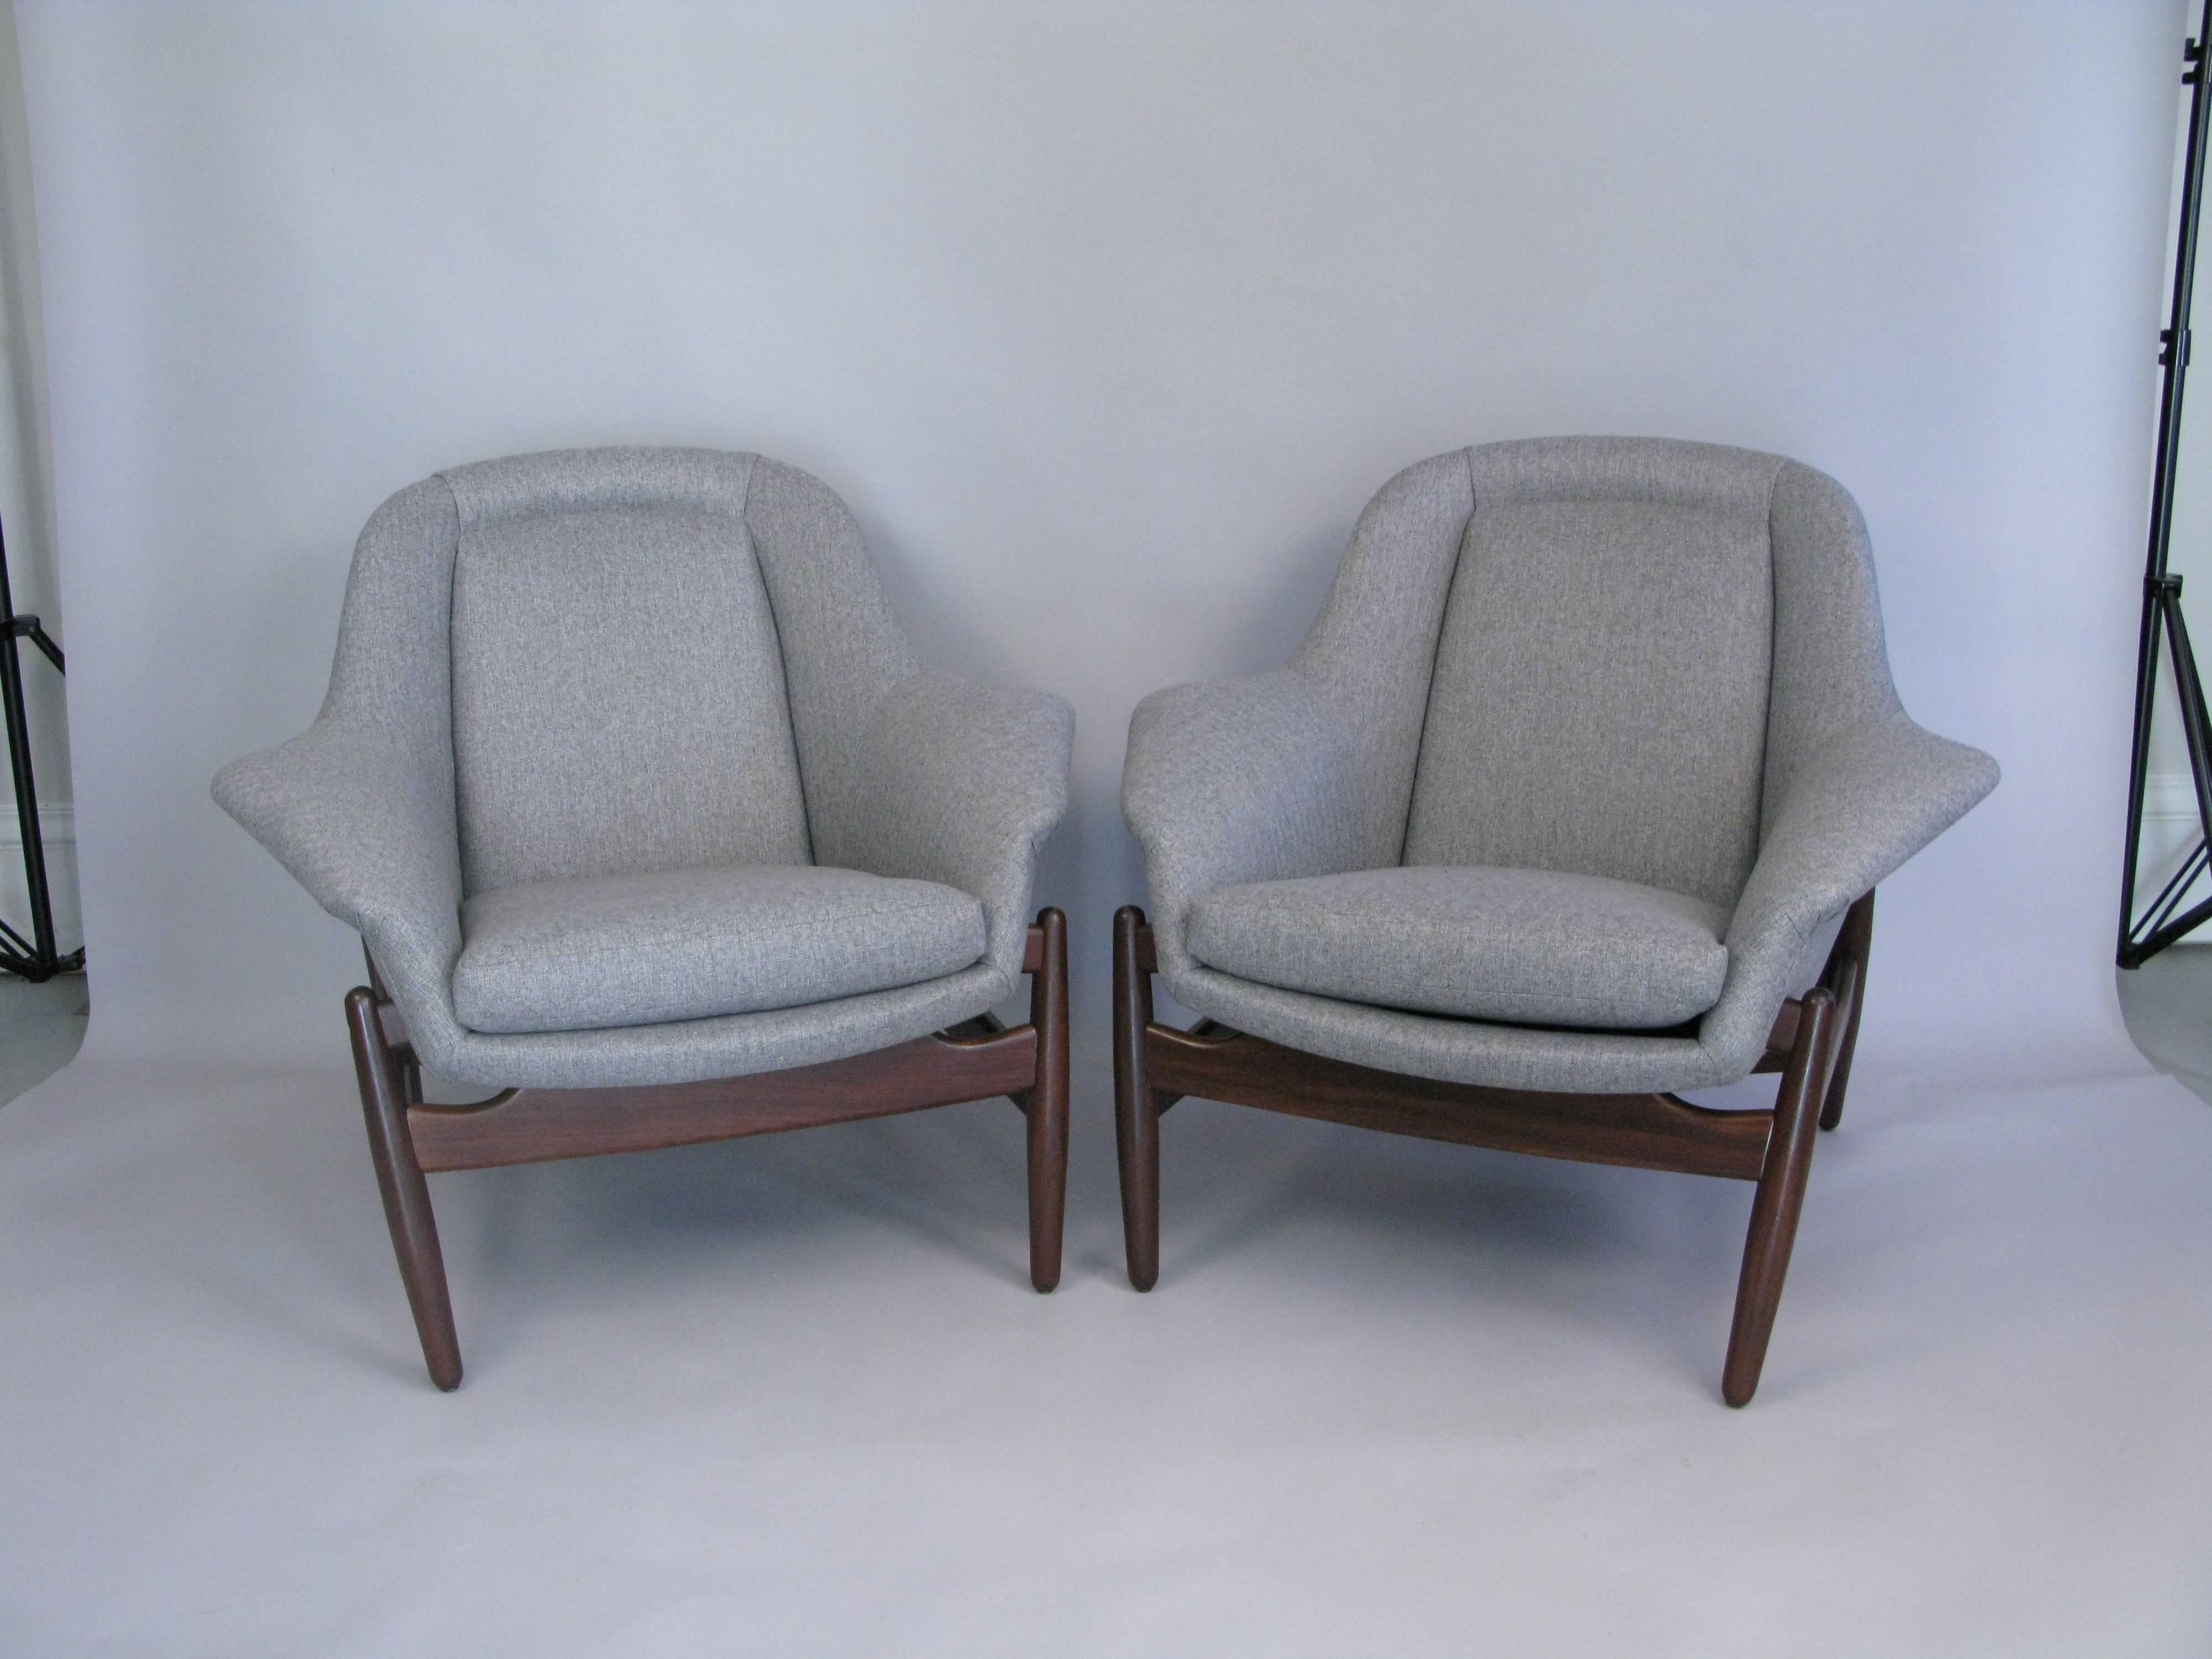 A fine pair of Danish 1960s walnut framed lounge chairs with a George Tanier selection label. Excellent design and comfort. New upholstery and finish.